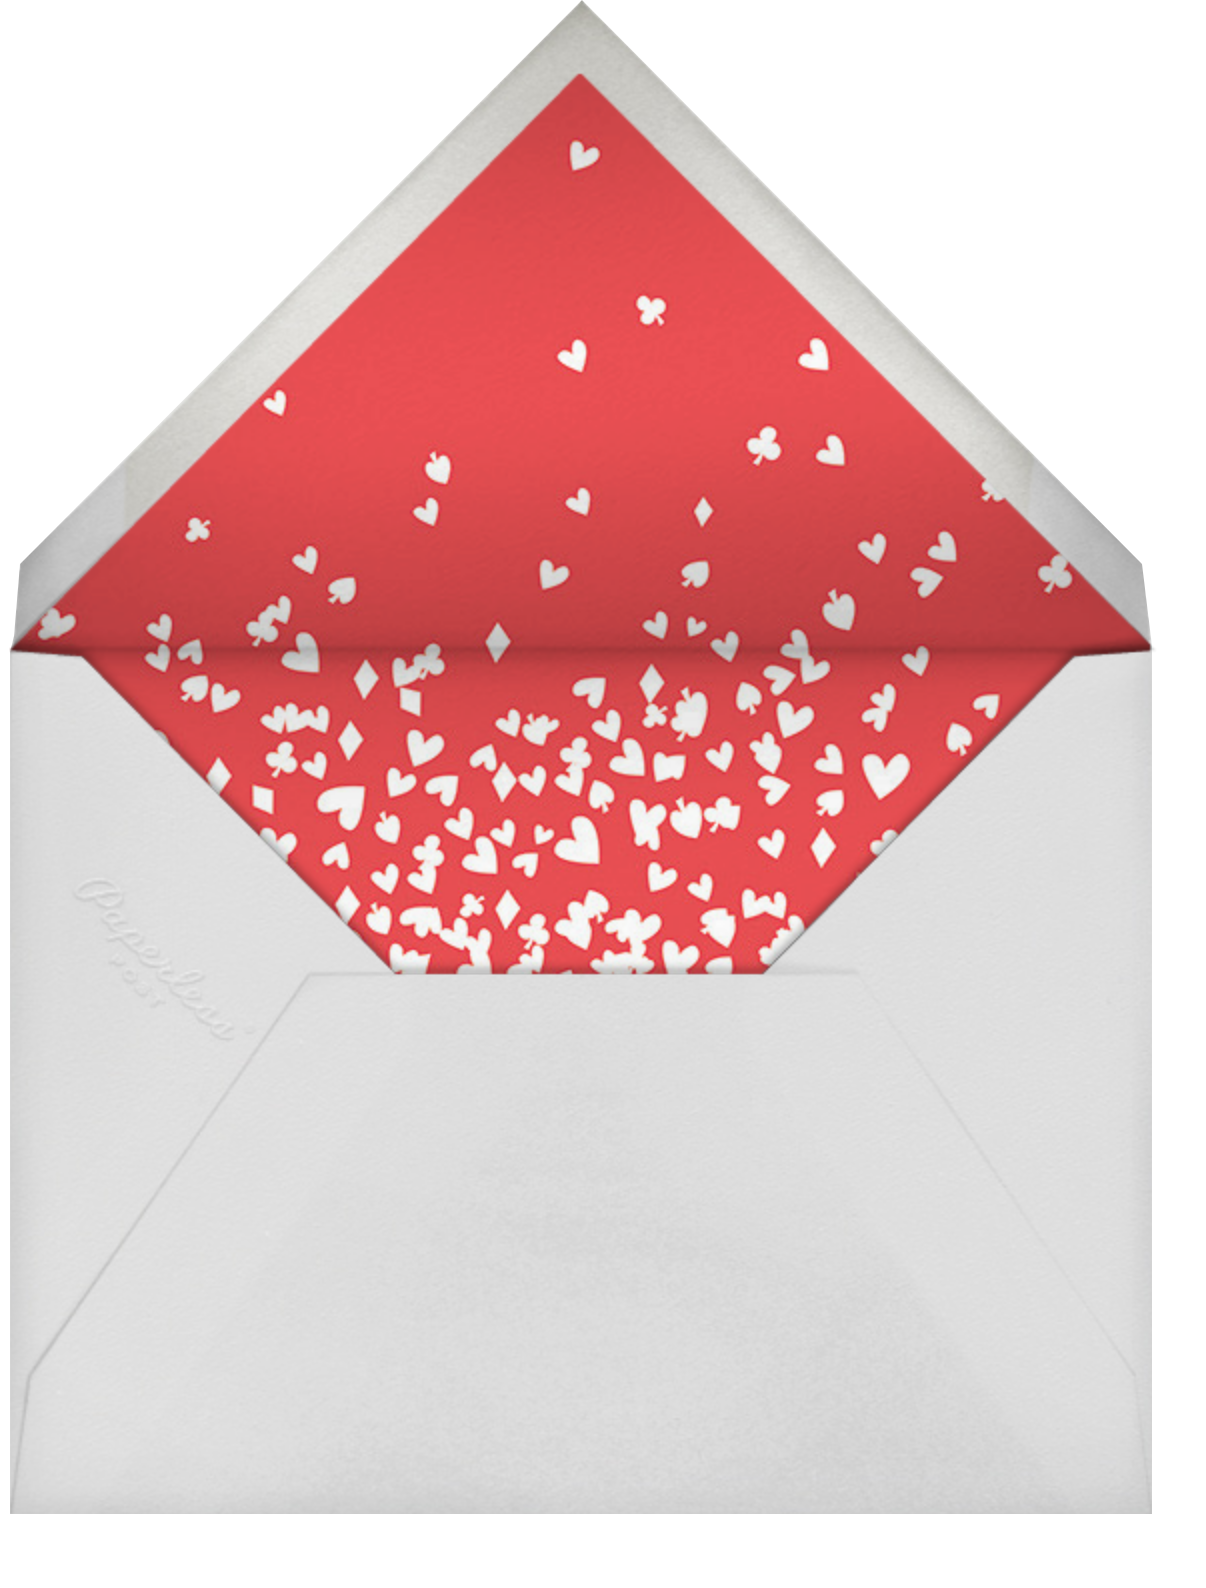 Well-Suited (His and Hers) - Fair - Cheree Berry Paper & Design - Envelope